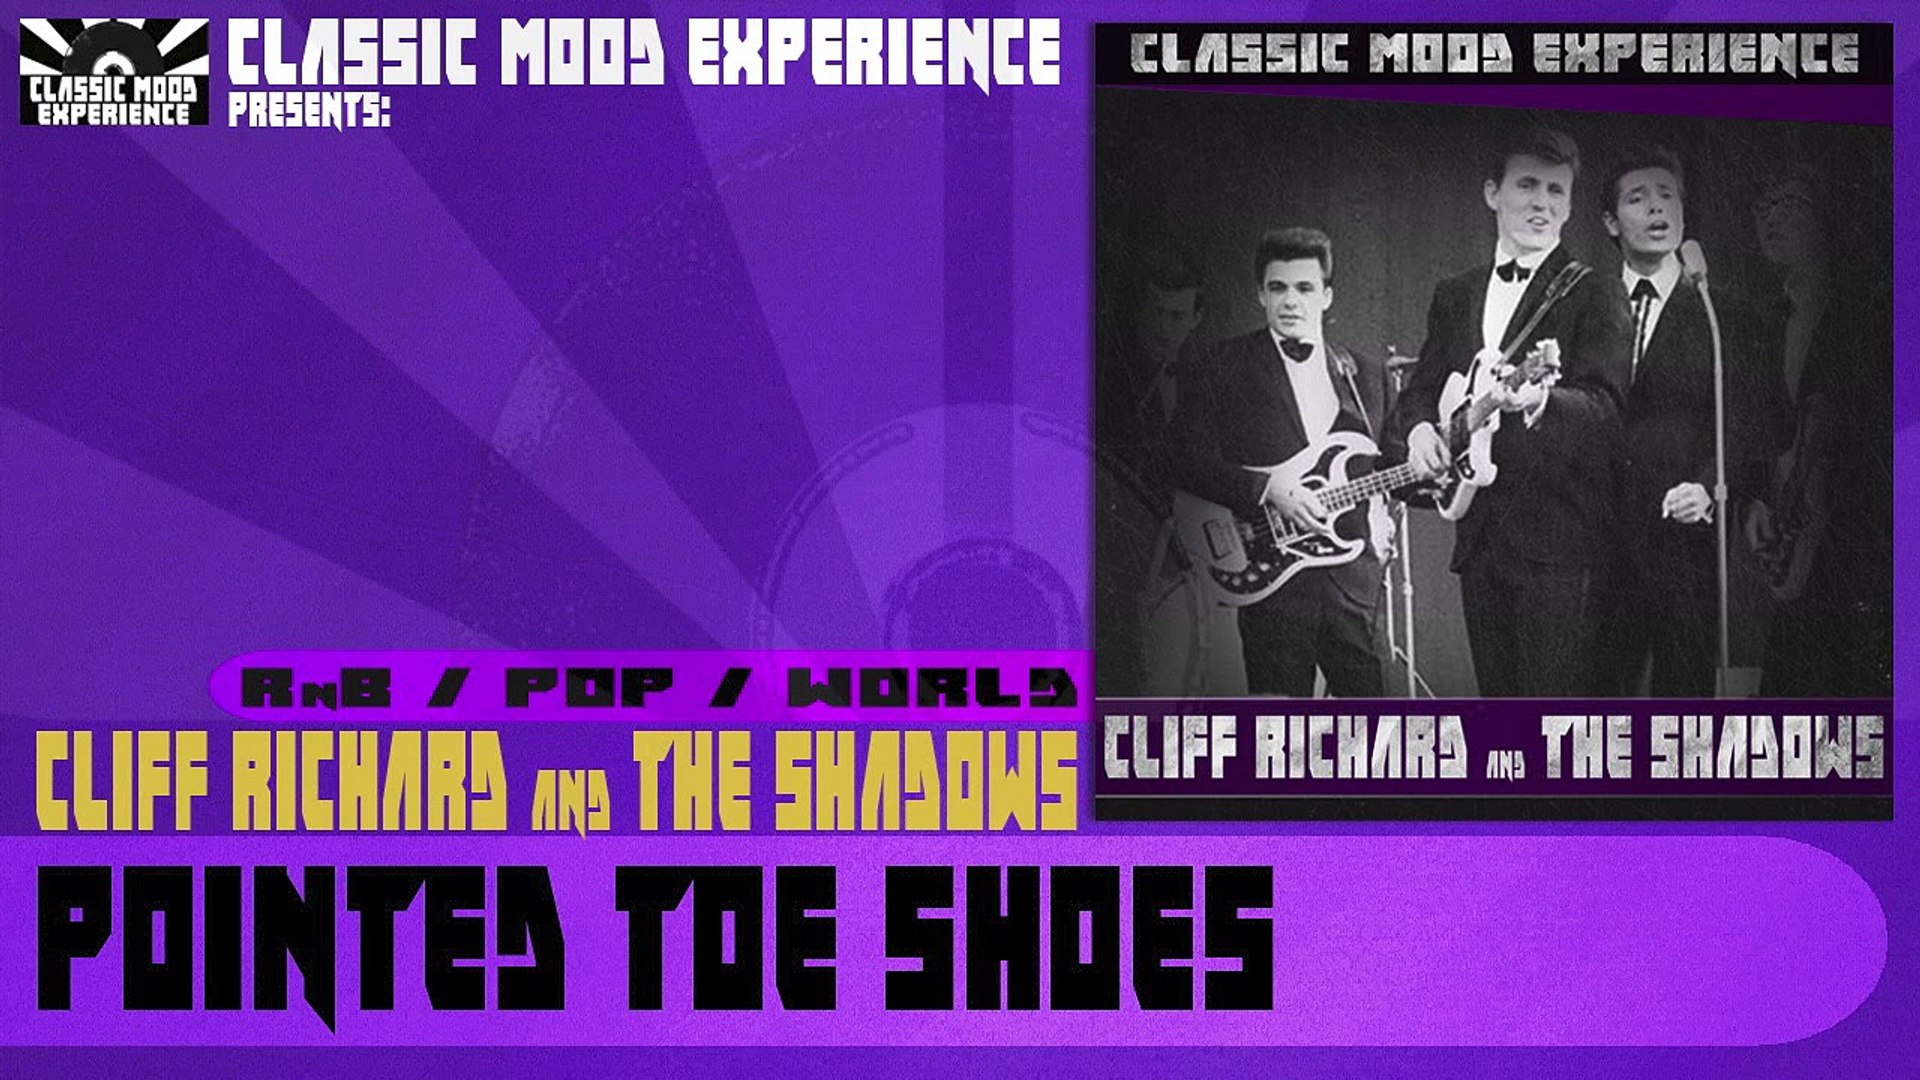 ⁣Cliff Richard & The Shadows - Pointed Toe Shoes (1959)